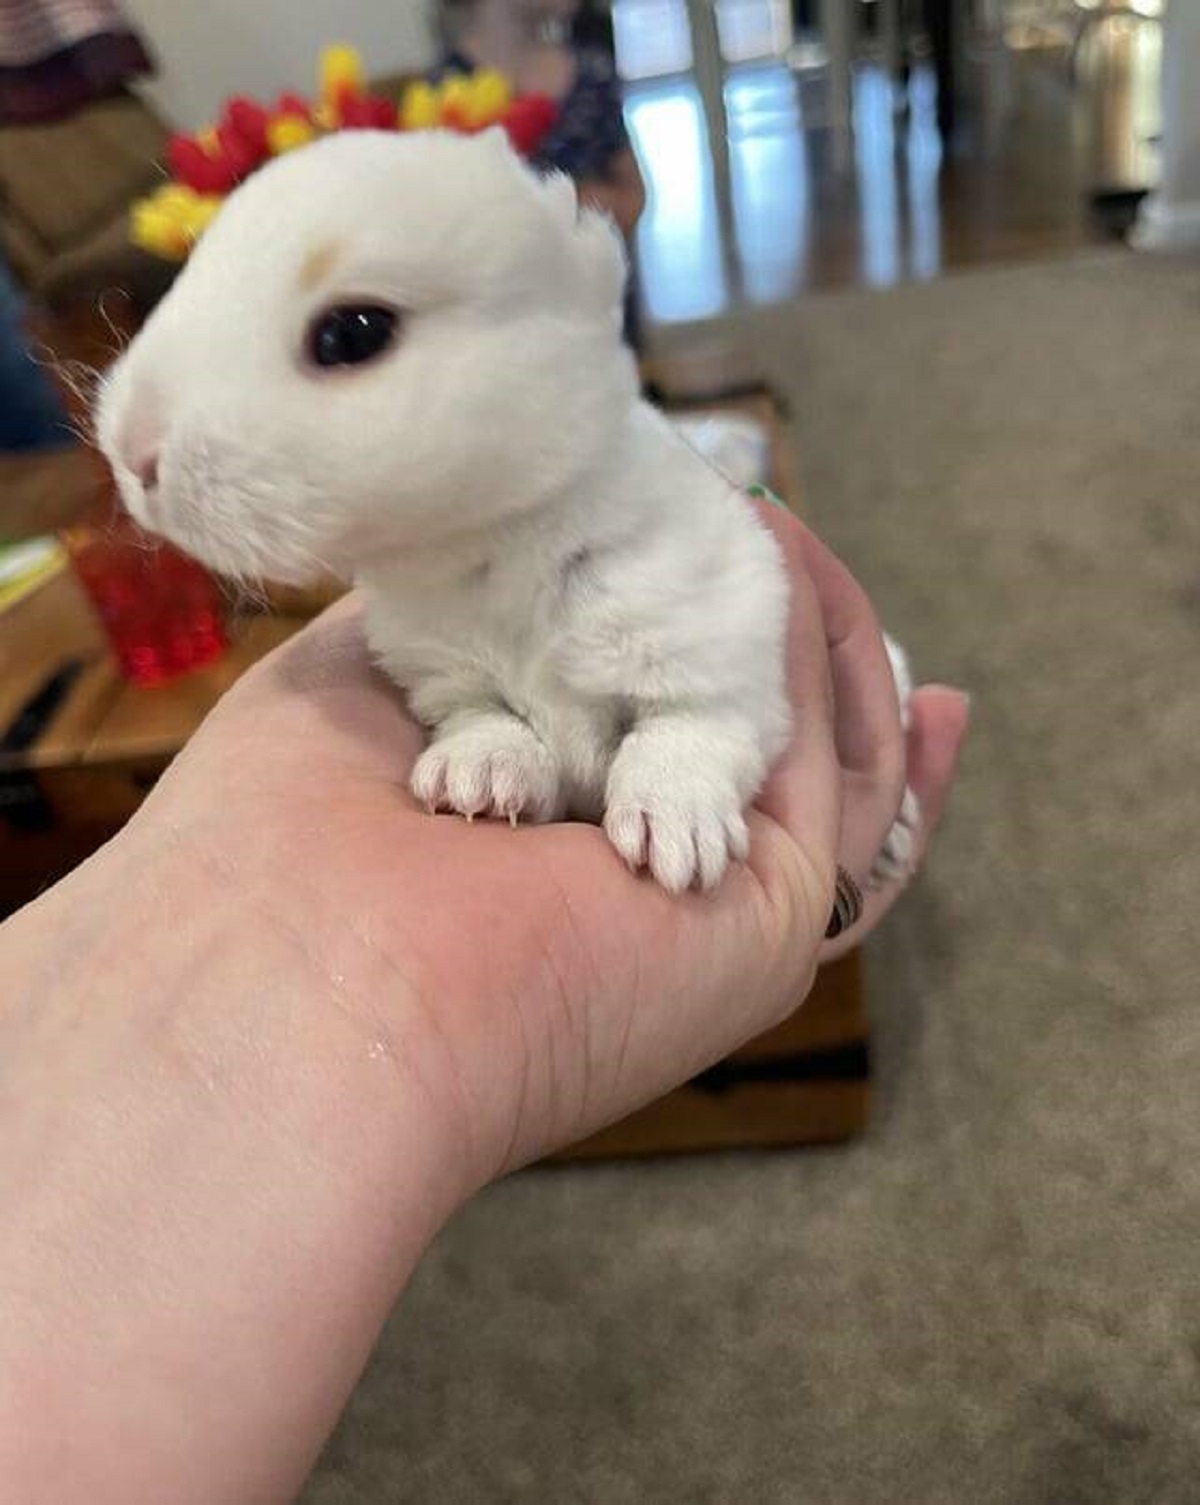 "Baby bunny with no ears"